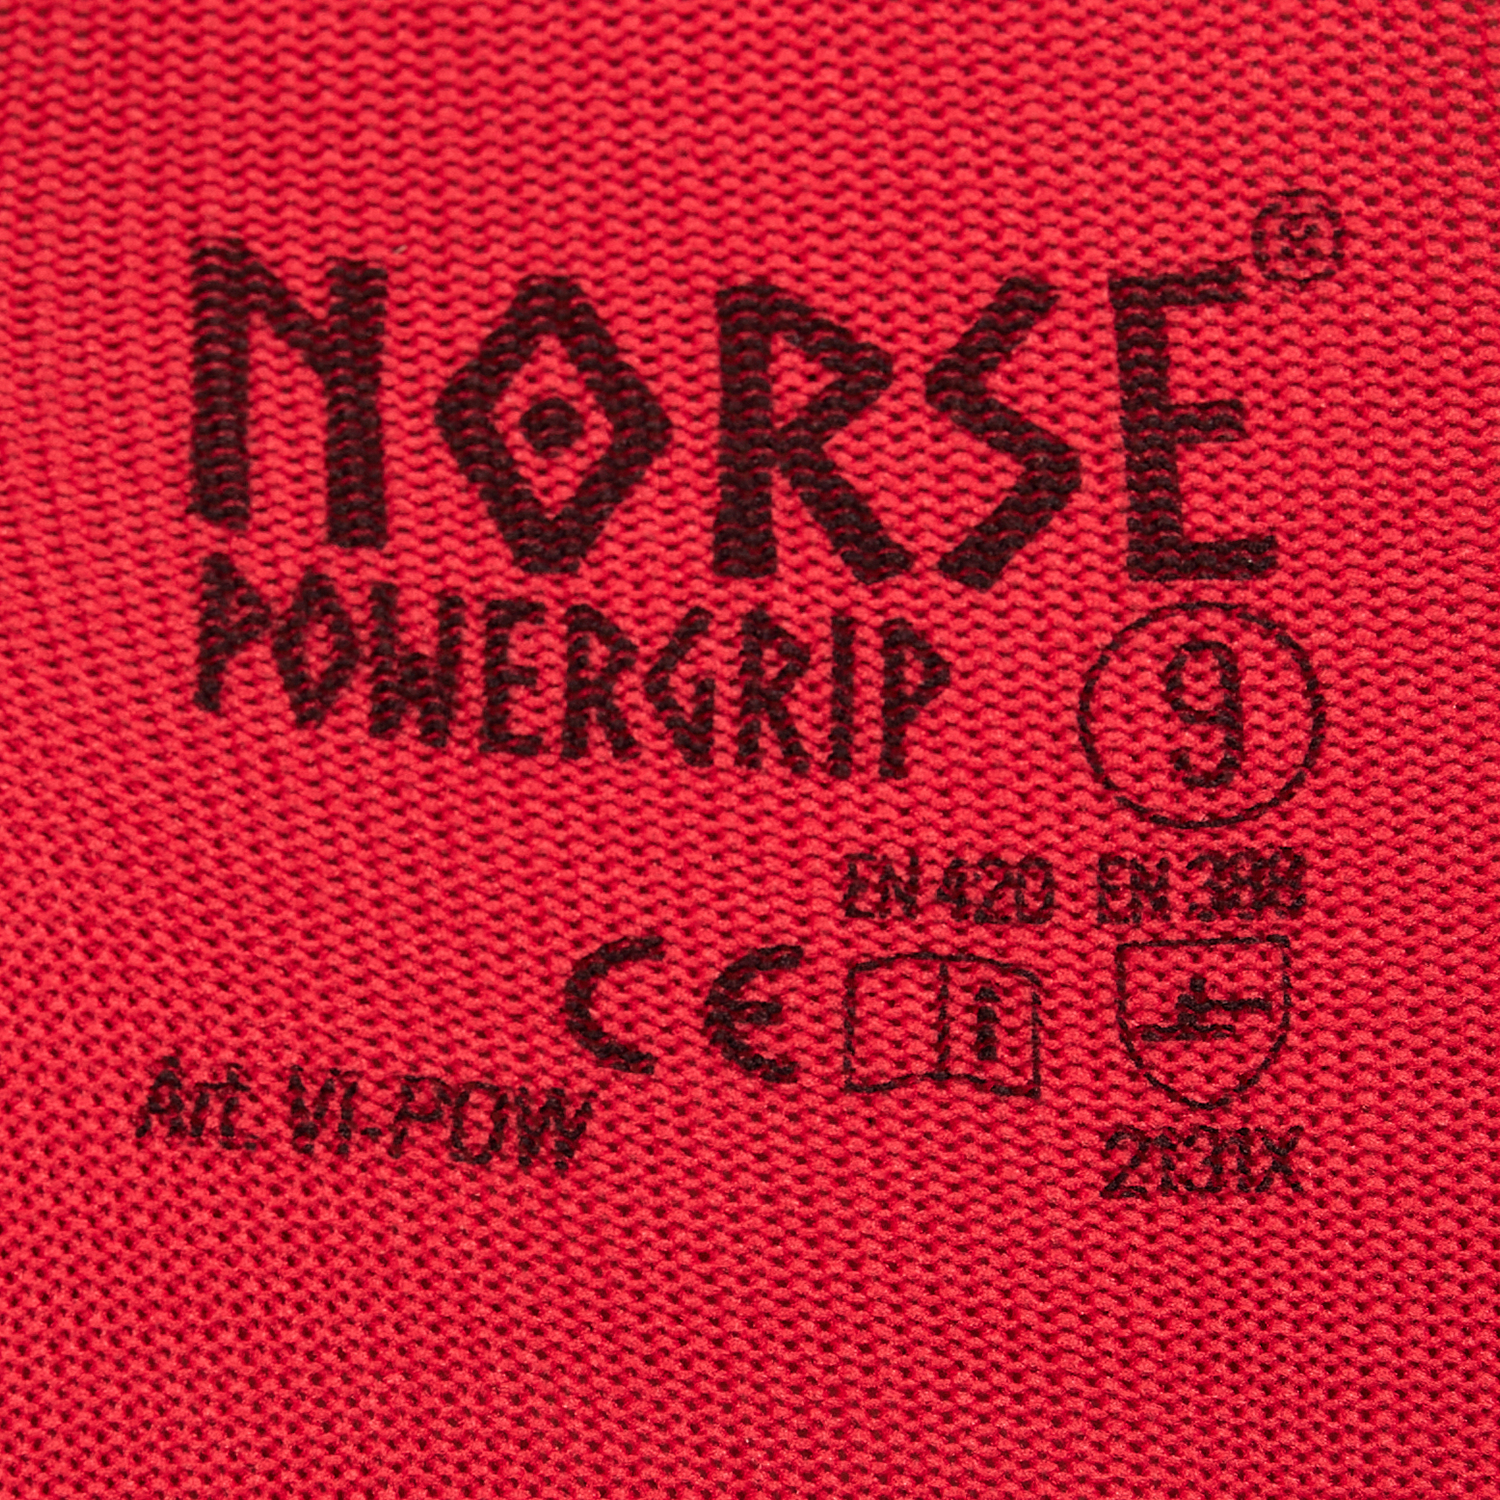 NORSE PowerGrip assembly gloves size 9